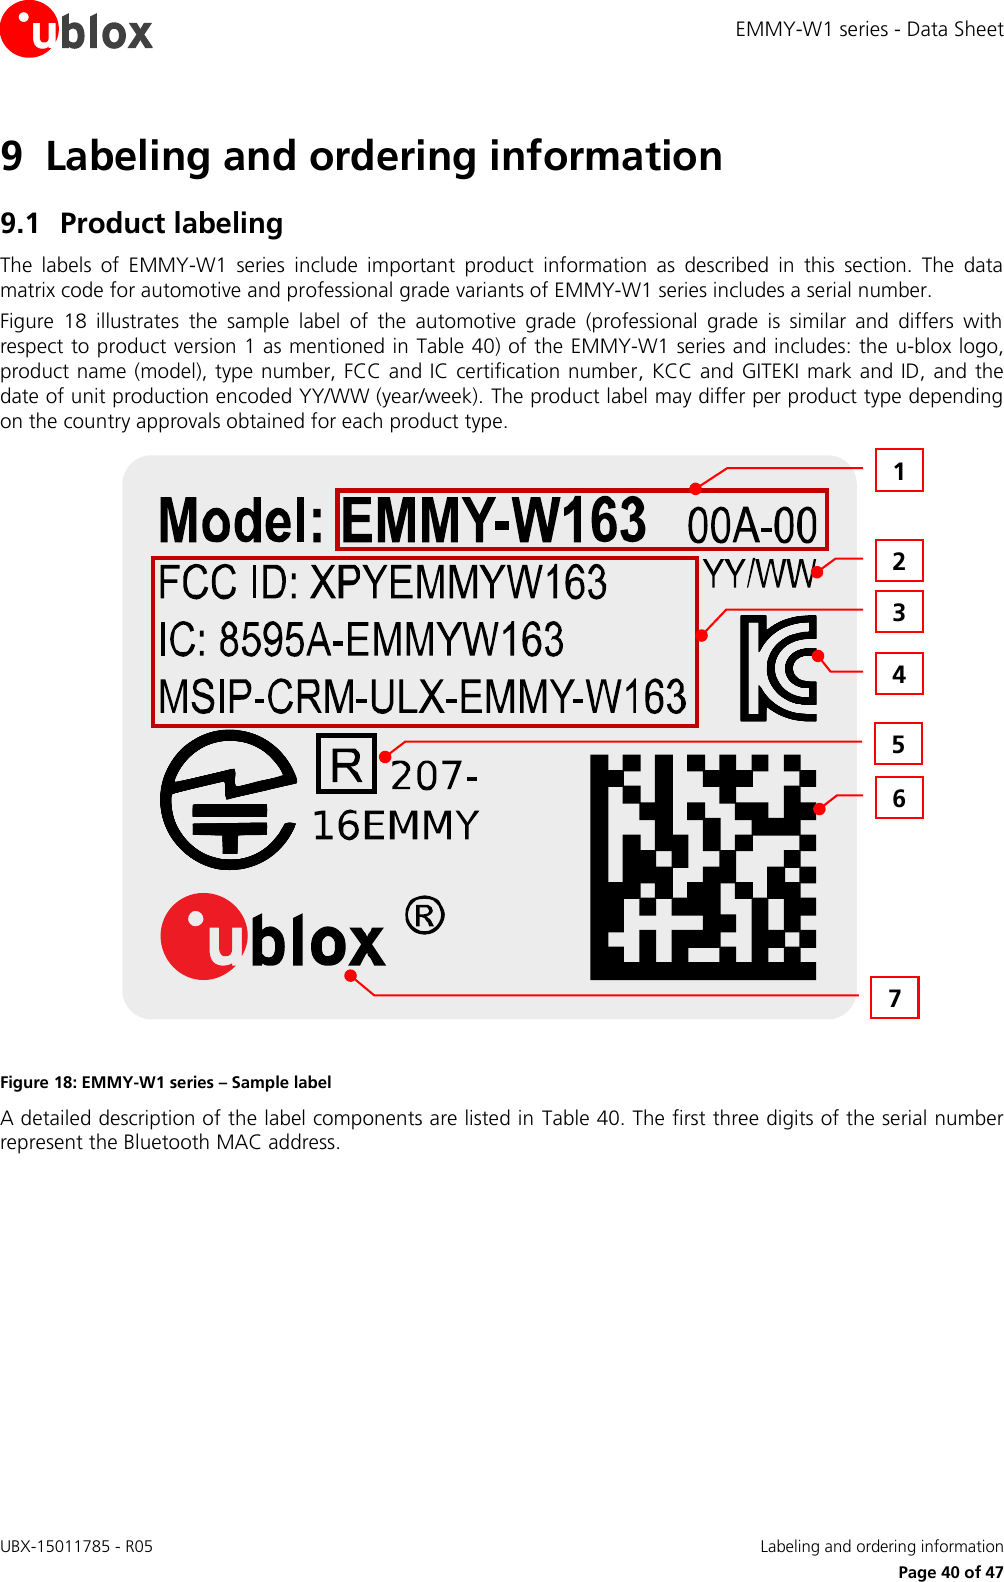 EMMY-W1 series - Data Sheet UBX-15011785 - R05   Labeling and ordering information     Page 40 of 47 9 Labeling and ordering information 9.1 Product labeling The  labels  of  EMMY-W1  series  include  important  product  information  as  described  in  this  section.  The  data matrix code for automotive and professional grade variants of EMMY-W1 series includes a serial number.  Figure  18  illustrates  the  sample  label  of  the  automotive  grade  (professional  grade  is  similar  and  differs  with respect to product version 1 as mentioned in Table 40) of the EMMY-W1 series and includes: the u-blox logo, product name (model), type number, FCC and IC certification number, KCC and GITEKI mark and ID, and  the date of unit production encoded YY/WW (year/week). The product label may differ per product type depending on the country approvals obtained for each product type.  Figure 18: EMMY-W1 series – Sample label A detailed description of the label components are listed in  Table 40. The first three digits of the serial number represent the Bluetooth MAC address.  7 3 6 2 1 4 5 